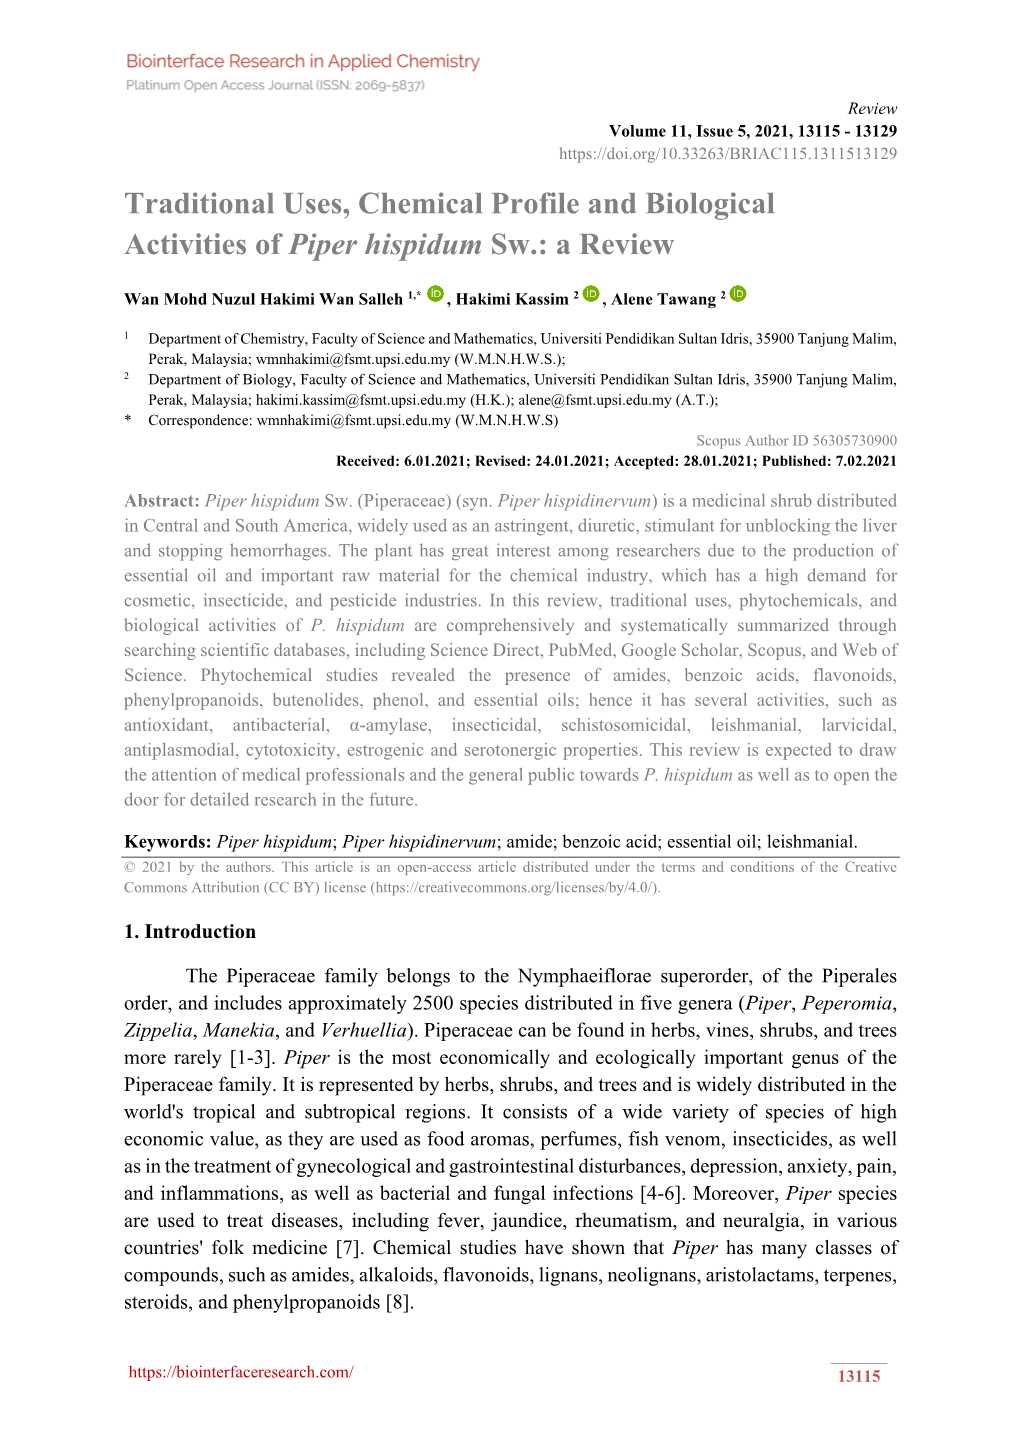 Traditional Uses, Chemical Profile and Biological Activities of Piper Hispidum Sw.: a Review